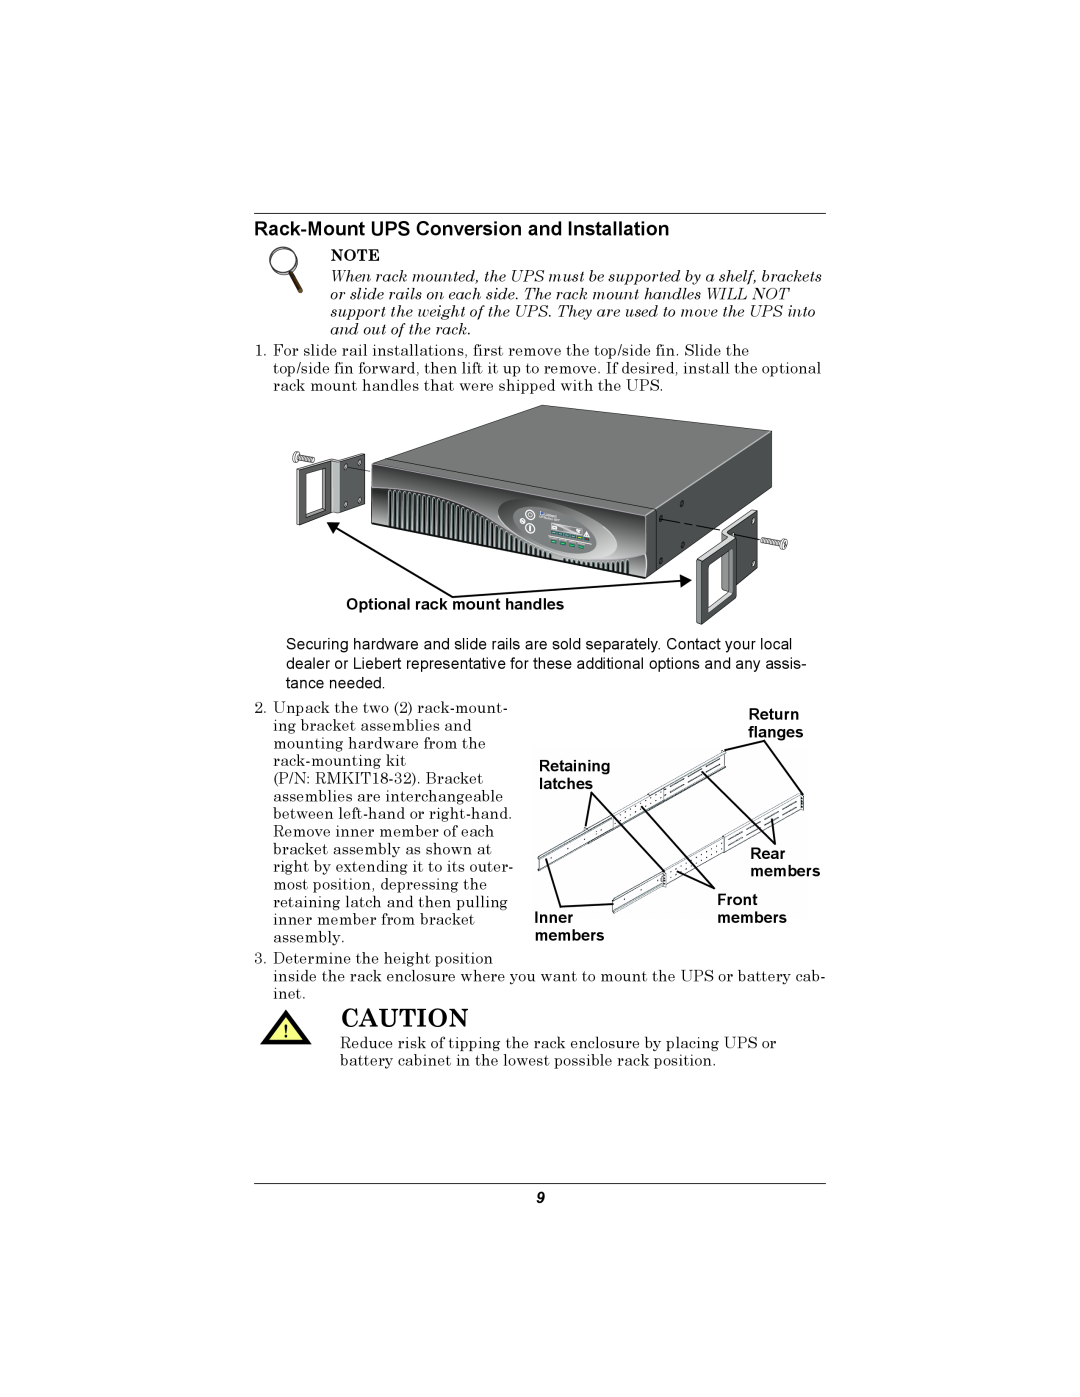 Emerson GXT2U Rack-Mount UPS Conversion and Installation, Optional rack mount handles, Retaining latches Inner members 